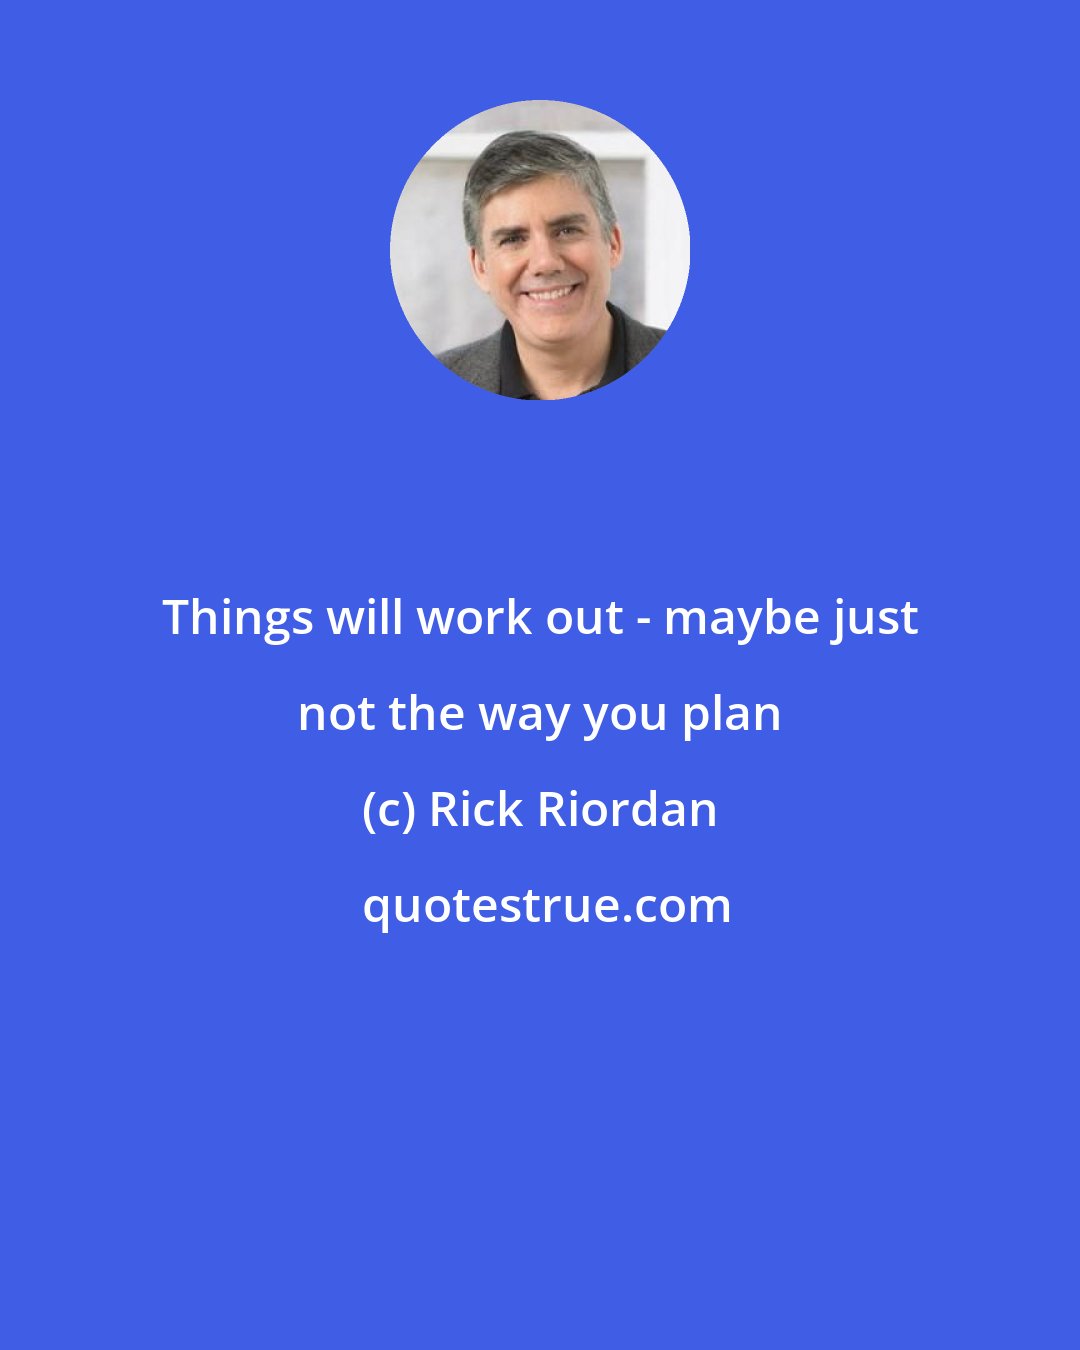 Rick Riordan: Things will work out - maybe just not the way you plan